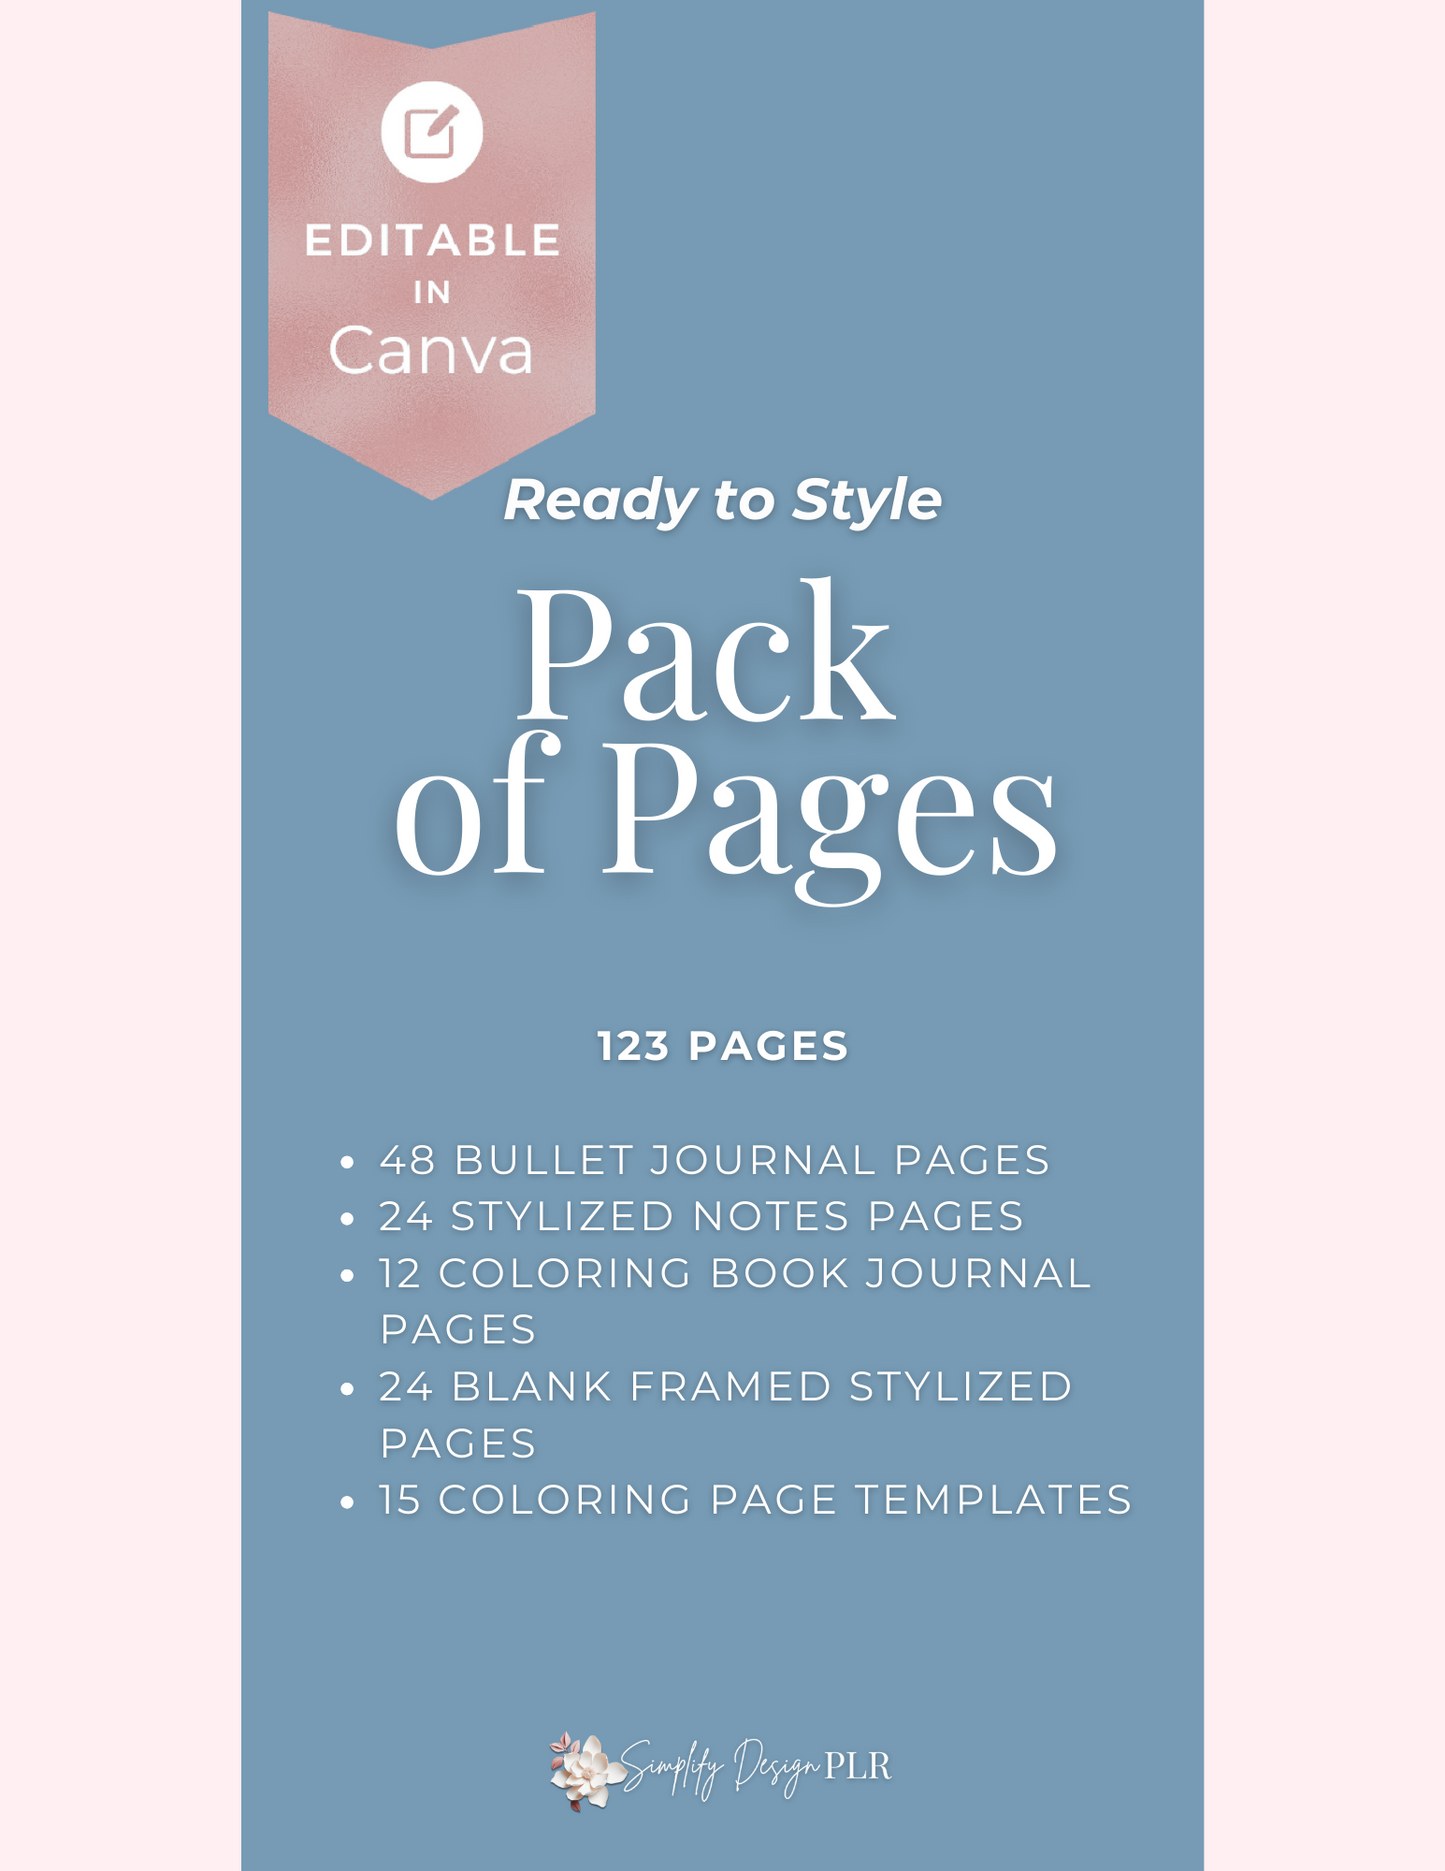 Ready to Style Pack of Pages